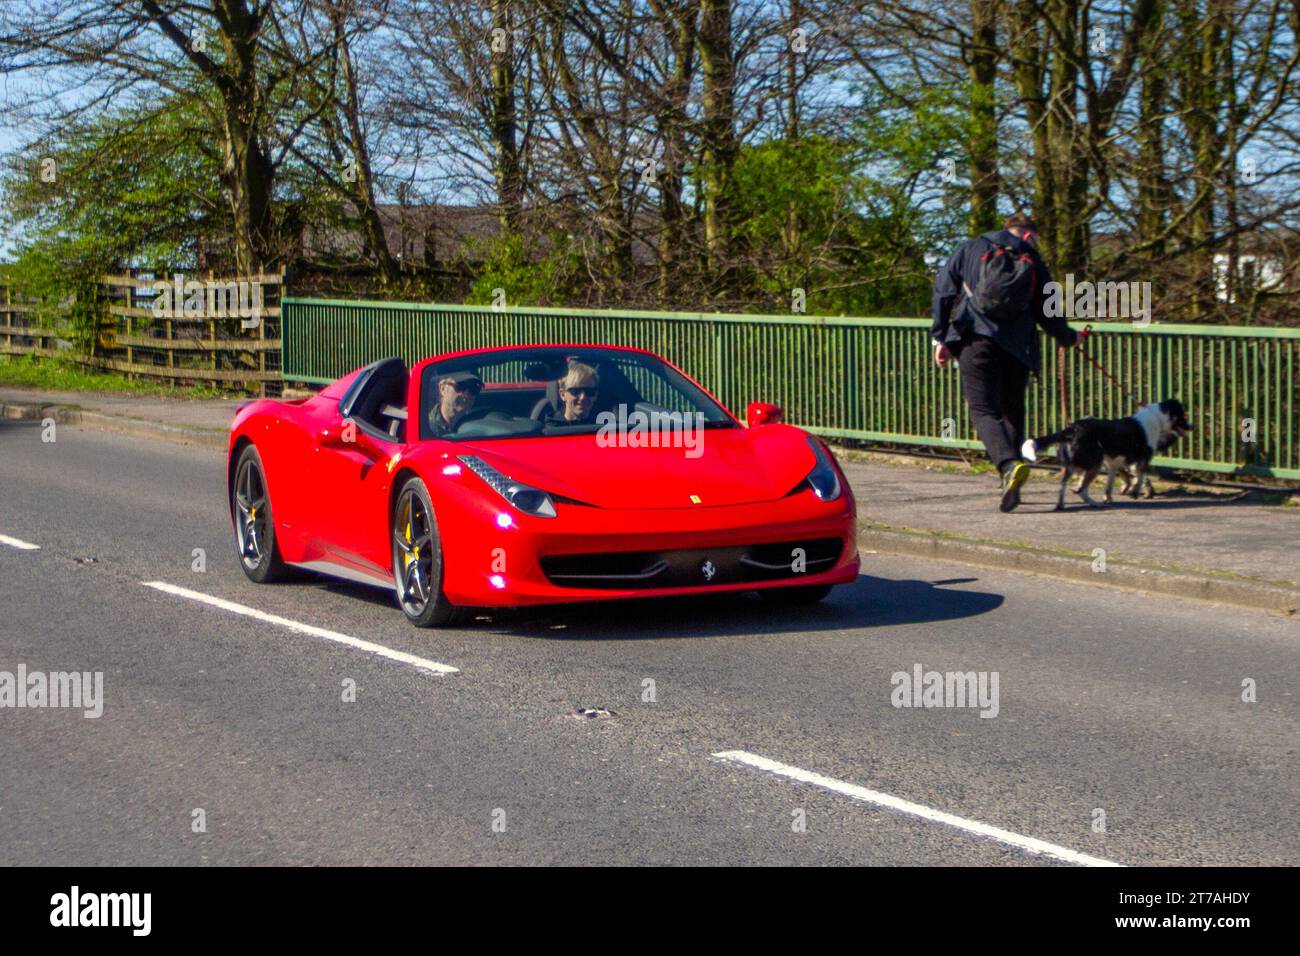 2014 red Ferrari 458 Spider Dct S-A sports car; Vehicular traffic, moving vehicles, cars, vehicle driving on UK roads, motors, motoring on the M6 motorway highway UK road network Stock Photo